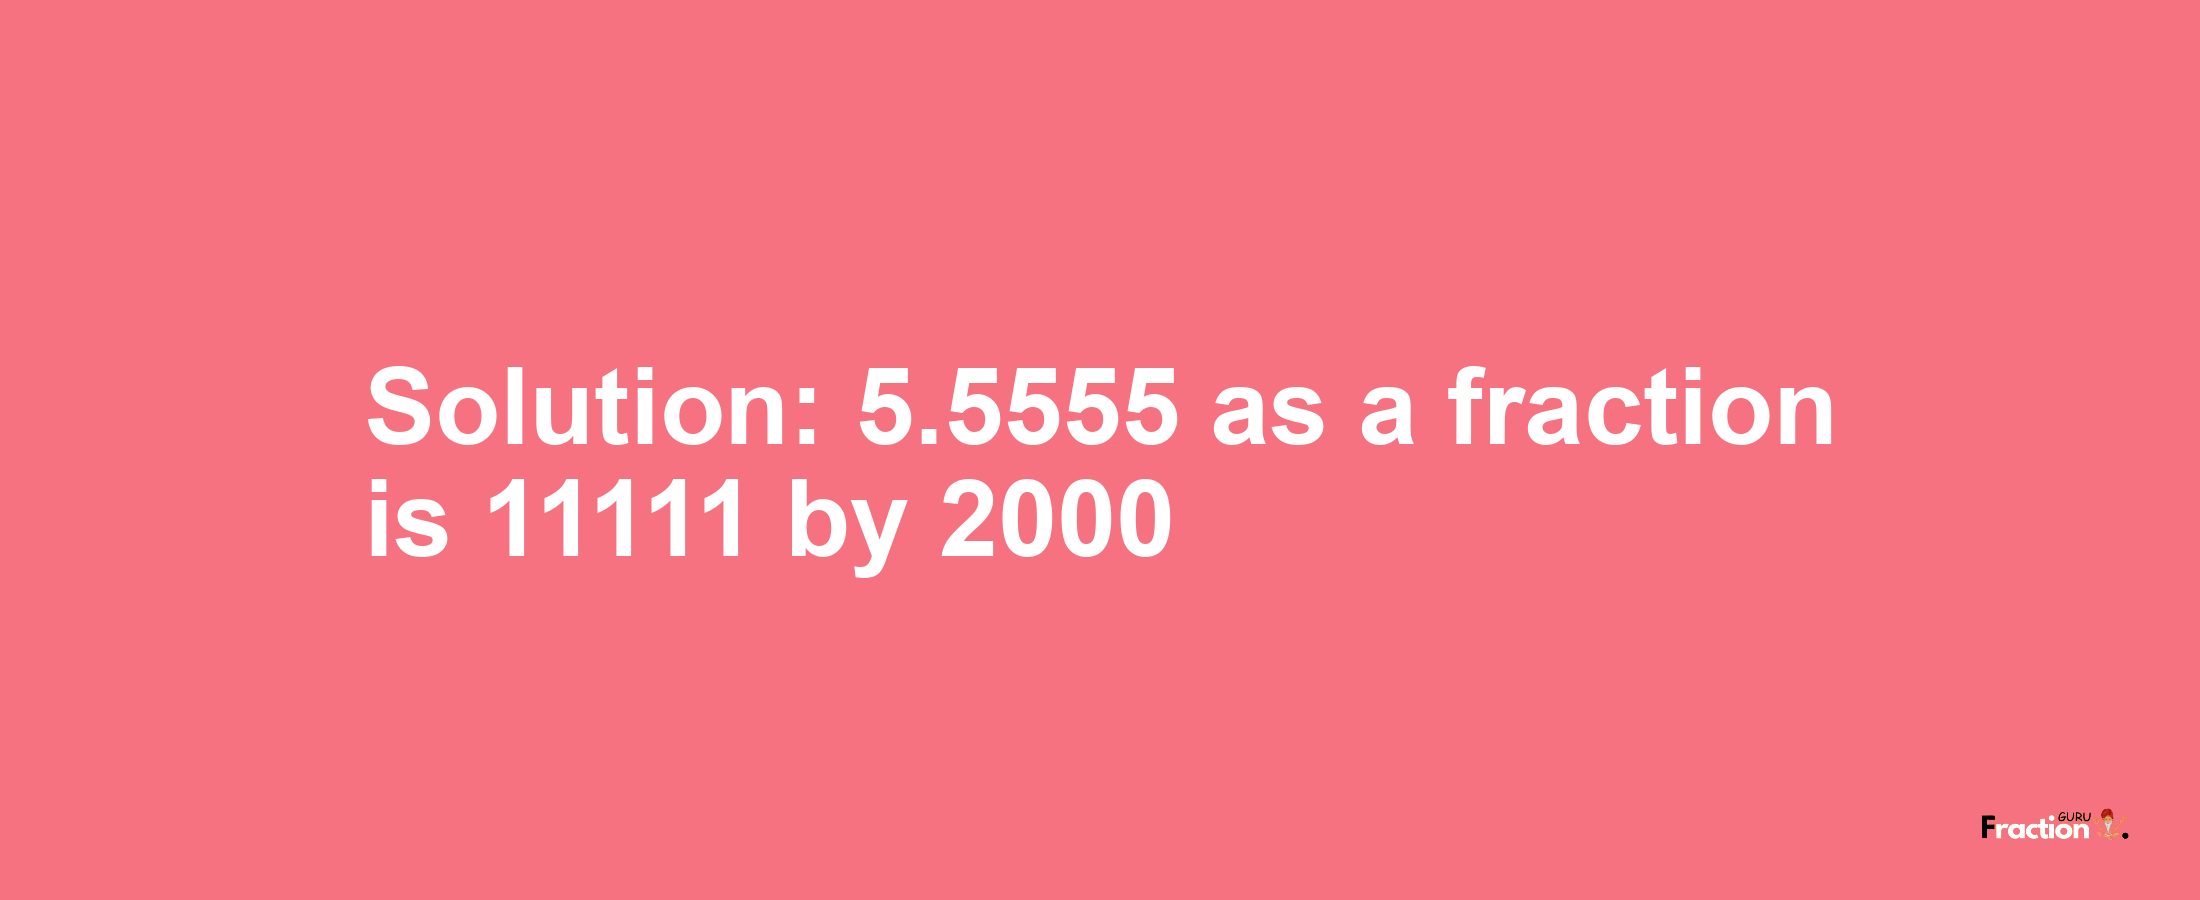 Solution:5.5555 as a fraction is 11111/2000